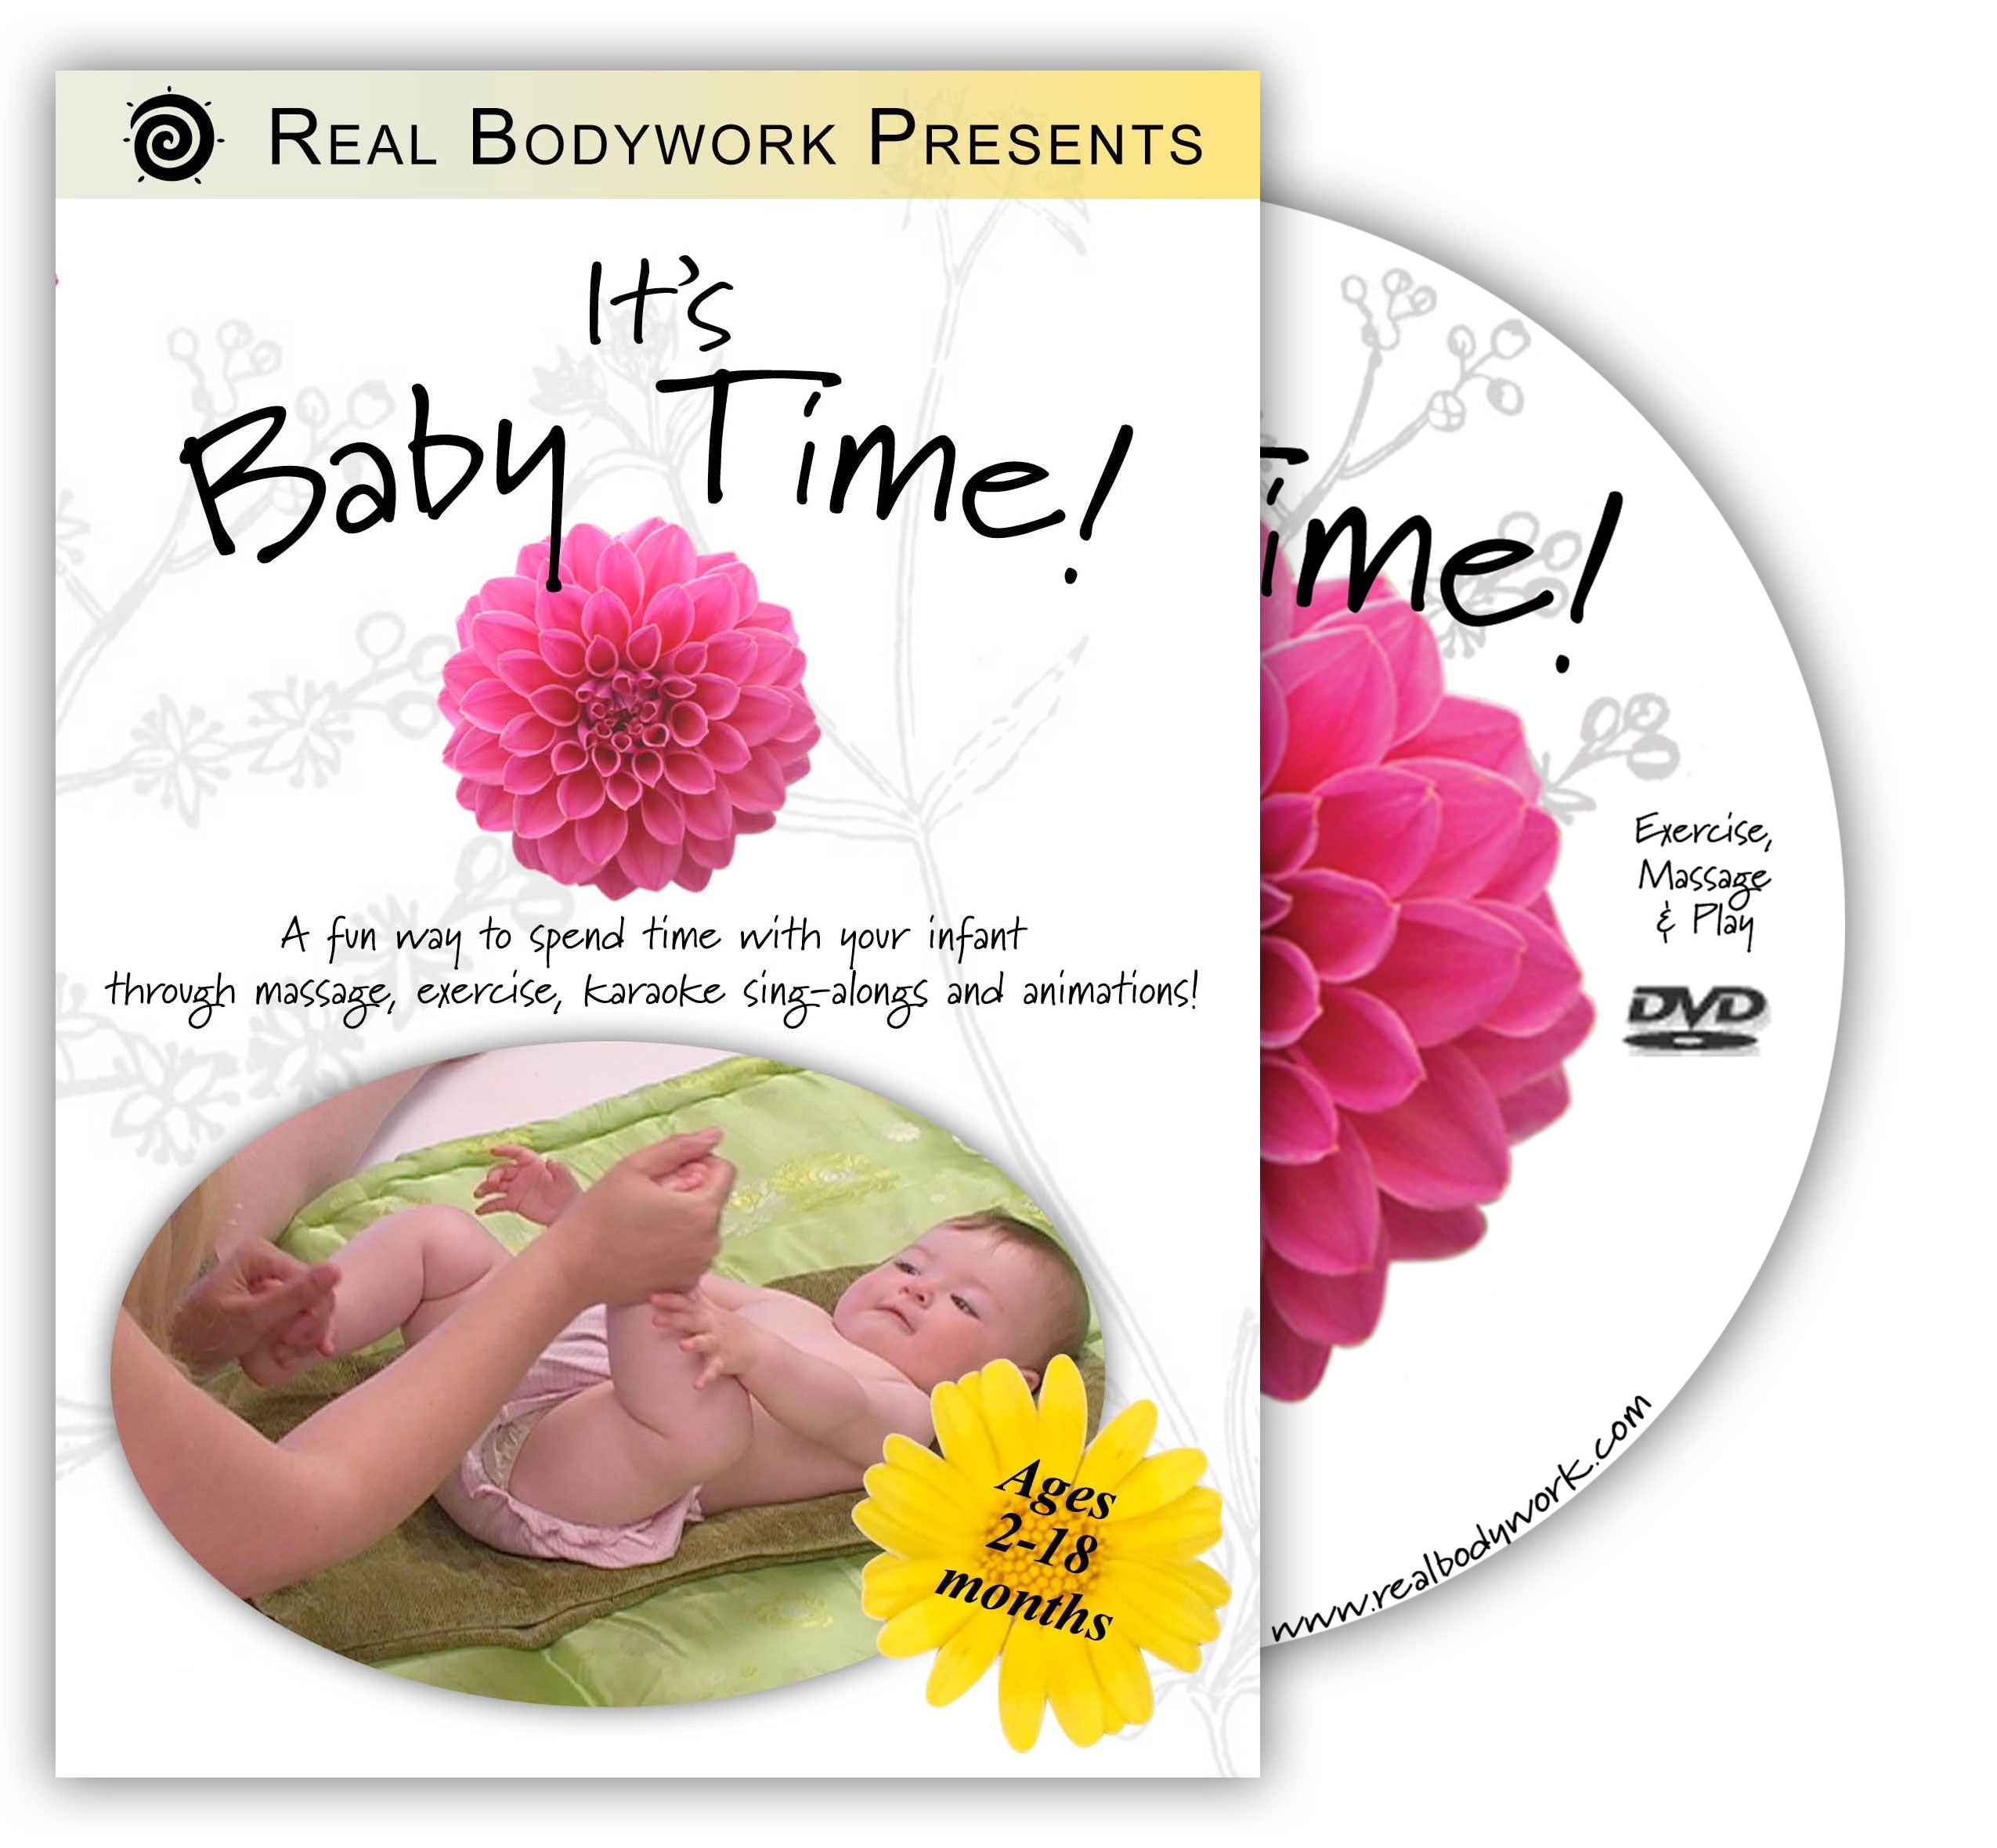 It's Baby Time! Infant Massage Video on DVD & Streaming Version - Real Bodywork